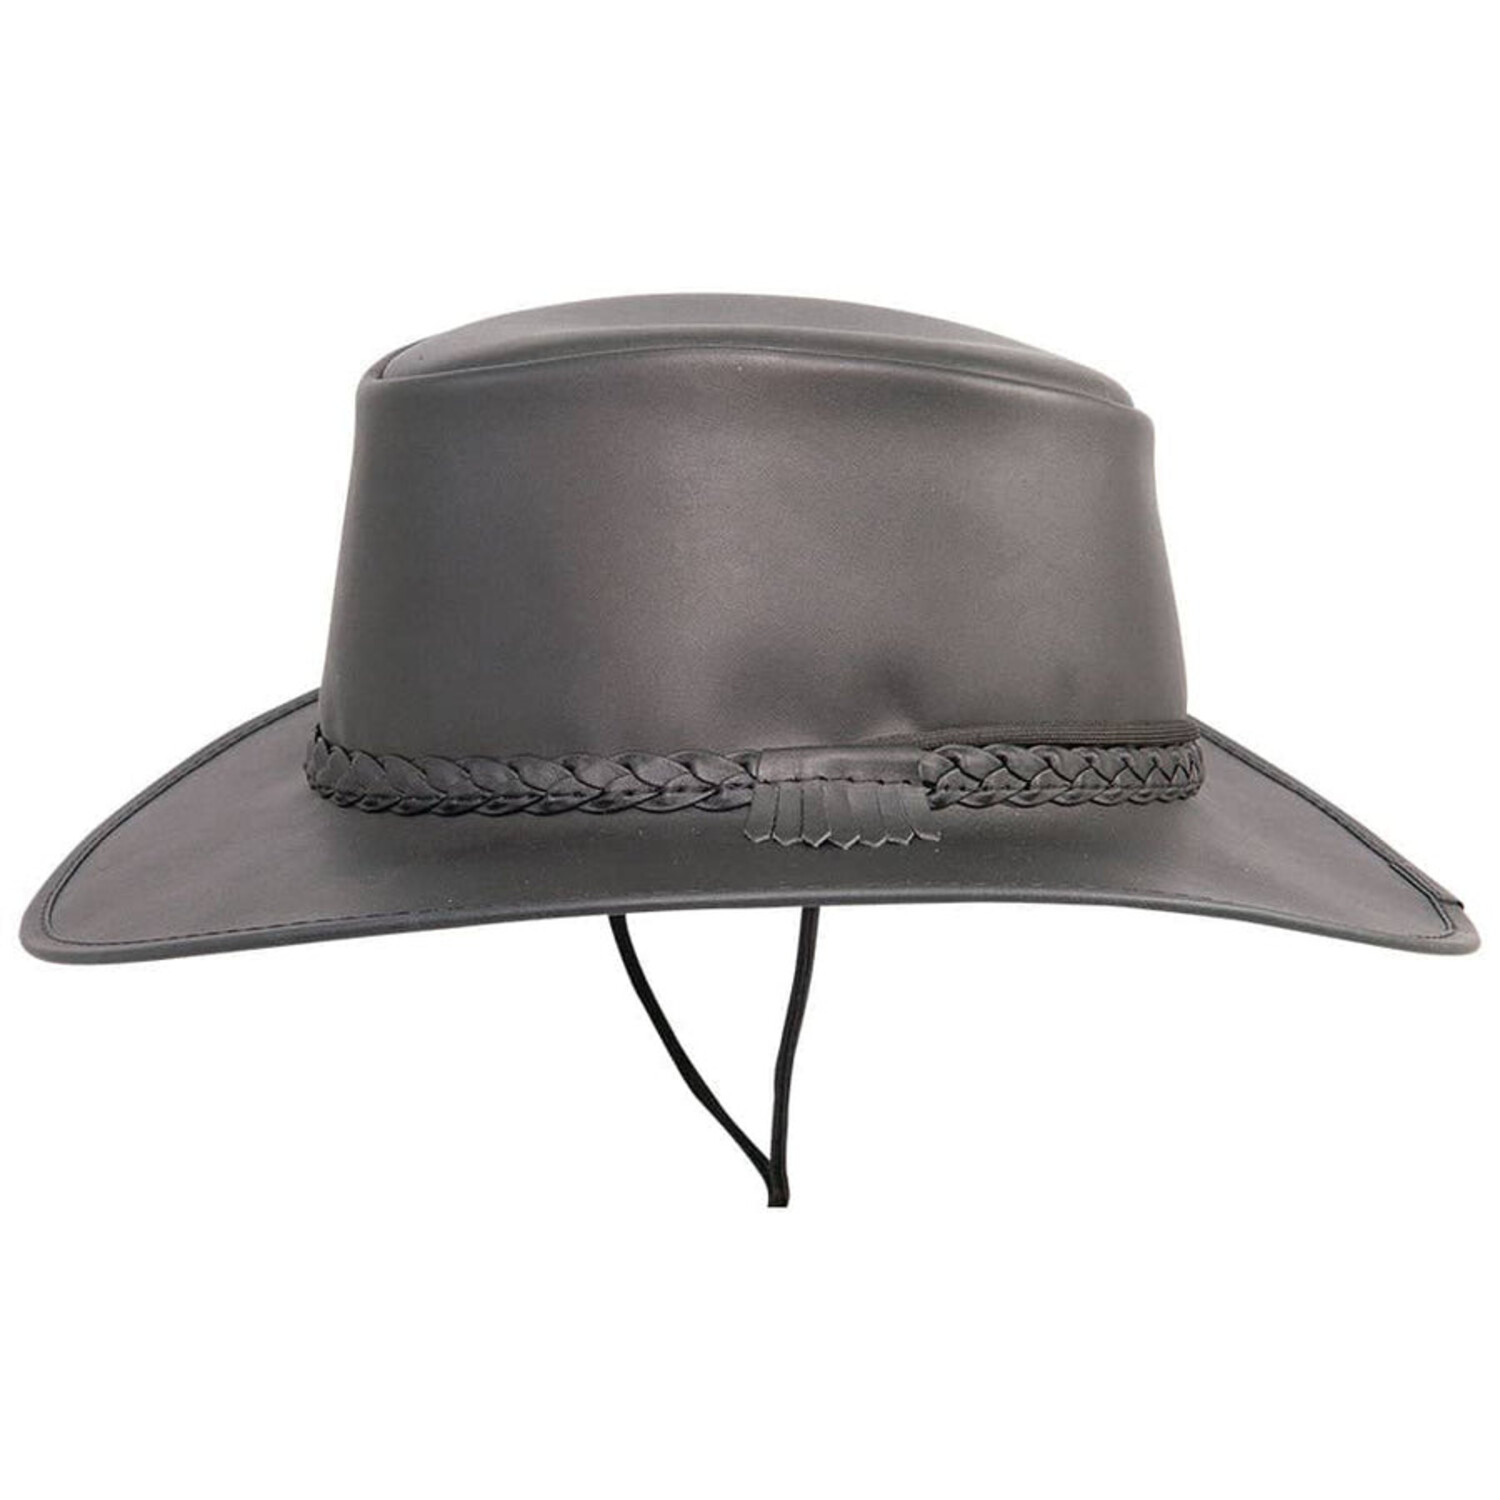 Crusher AMERICAN HAT Crushable Leather Outback Hat